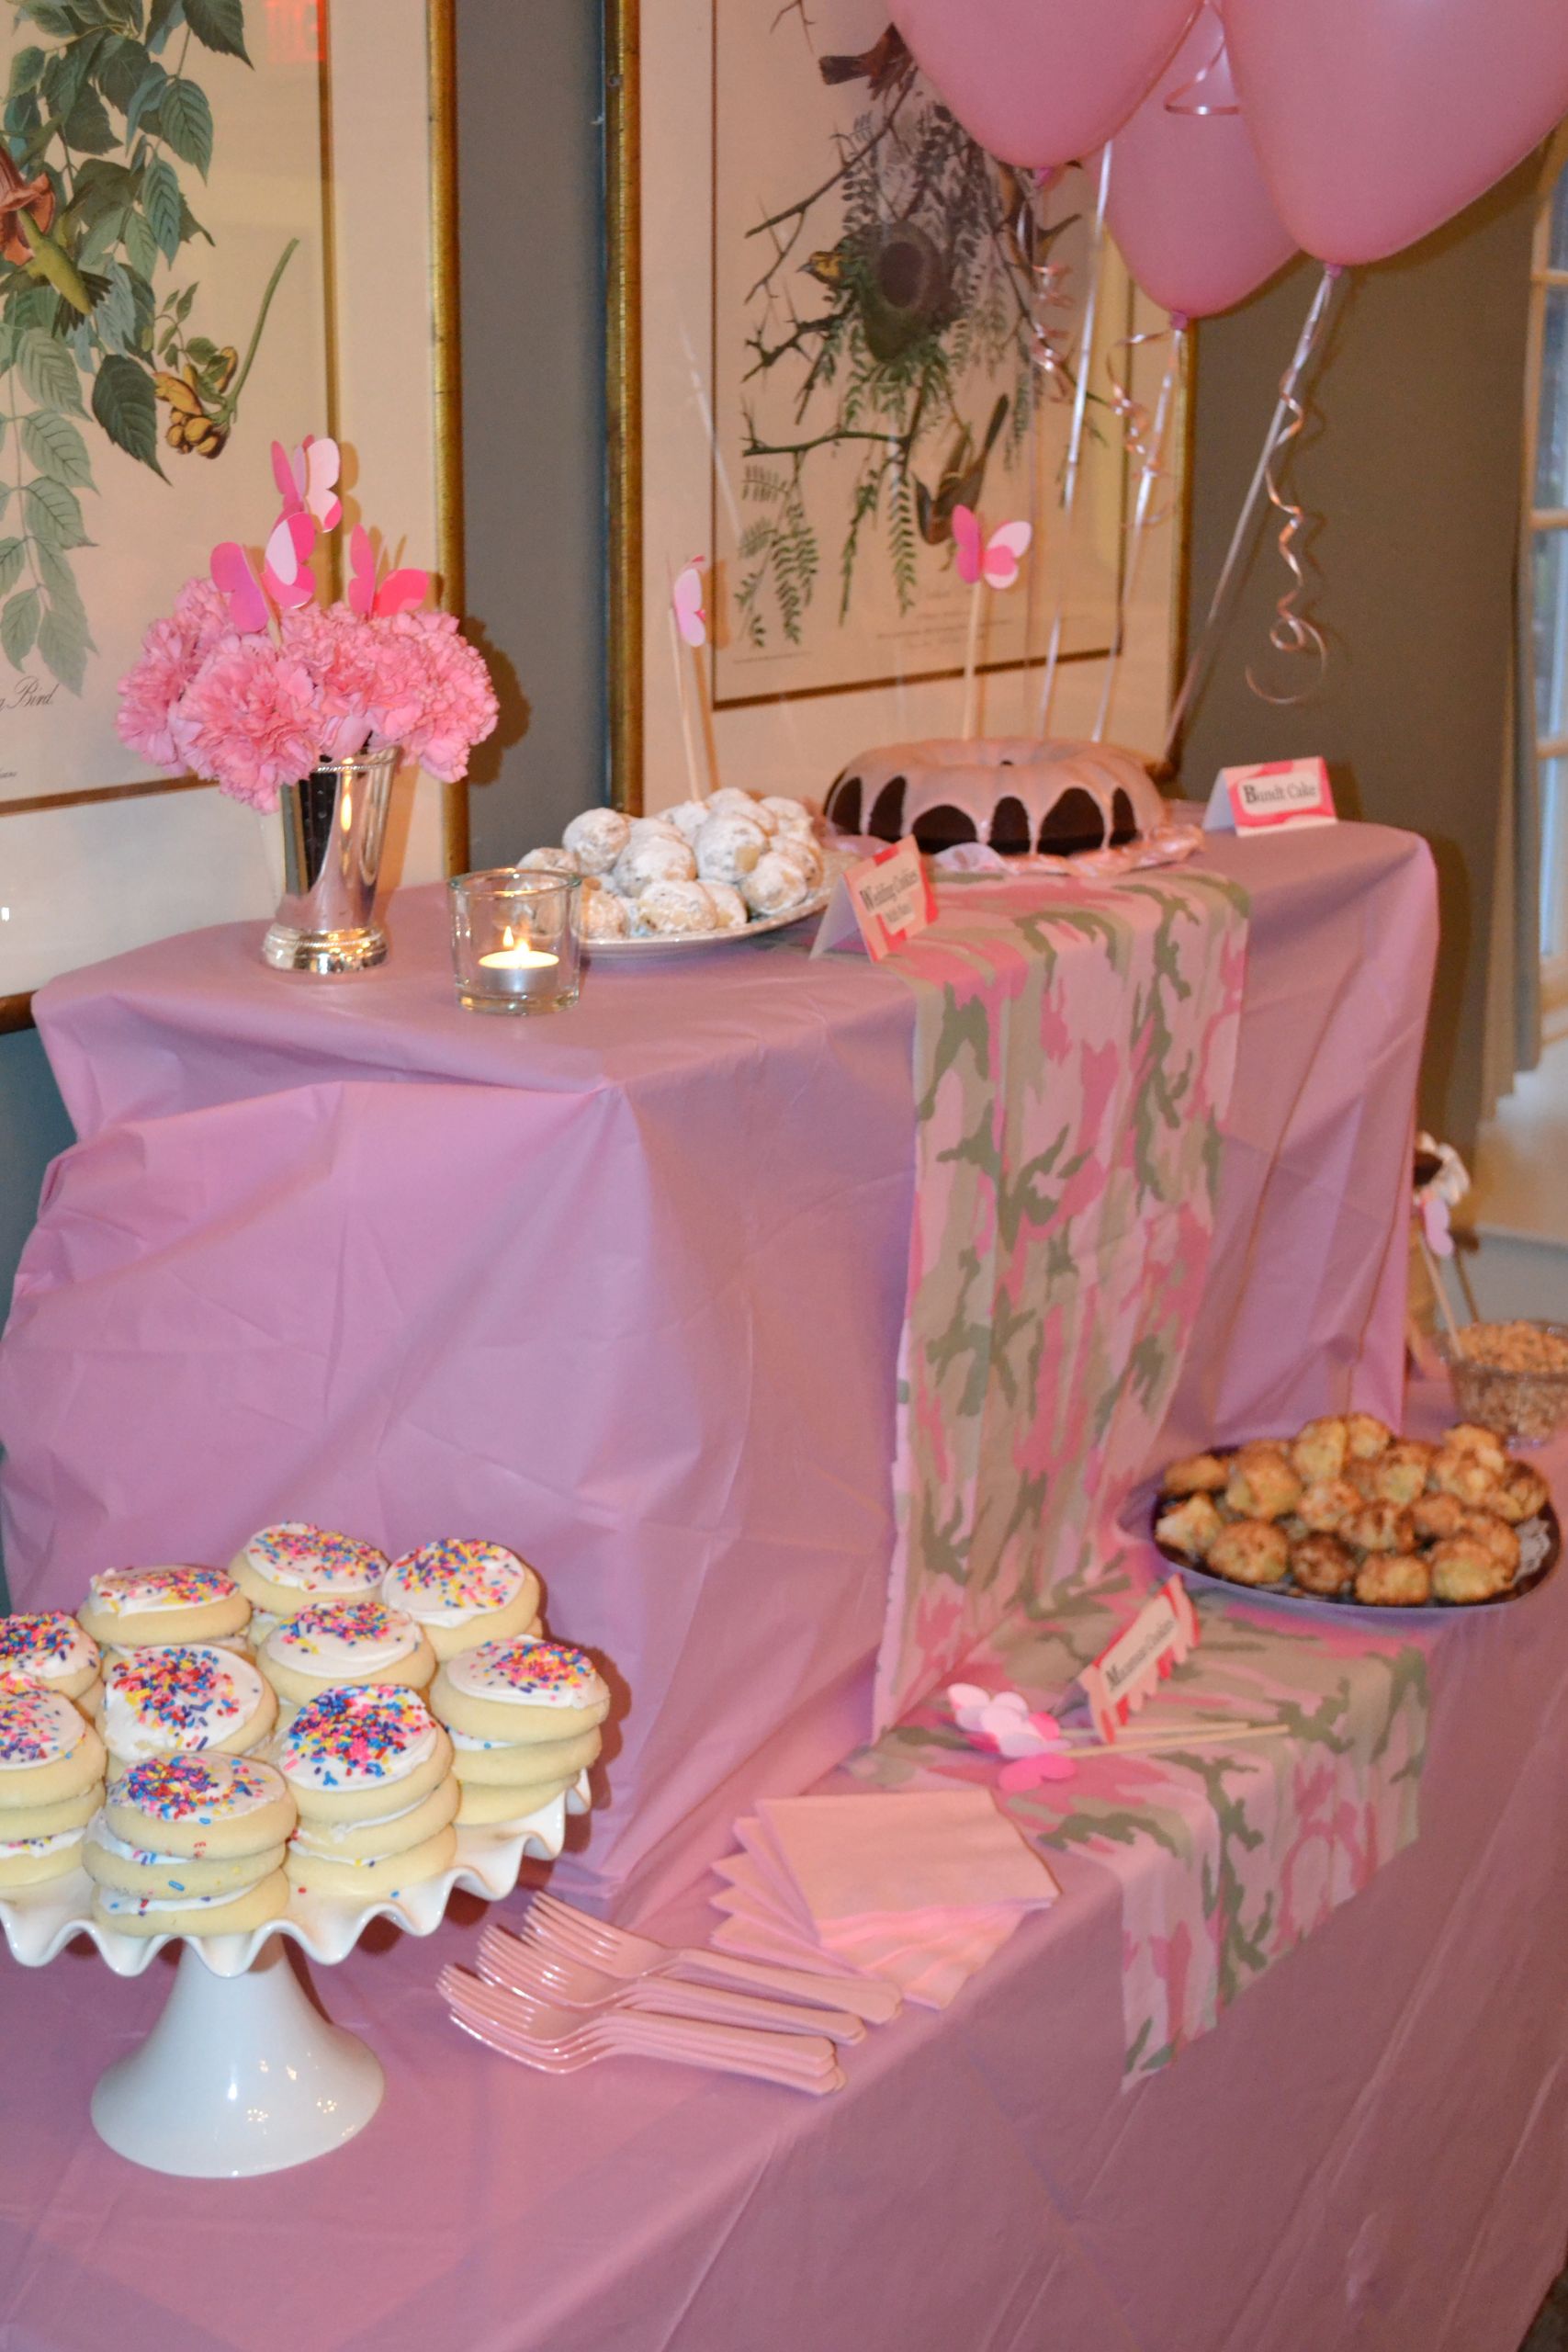 Camouflage Baby Shower Decorating Ideas
 Pink Camo baby shower